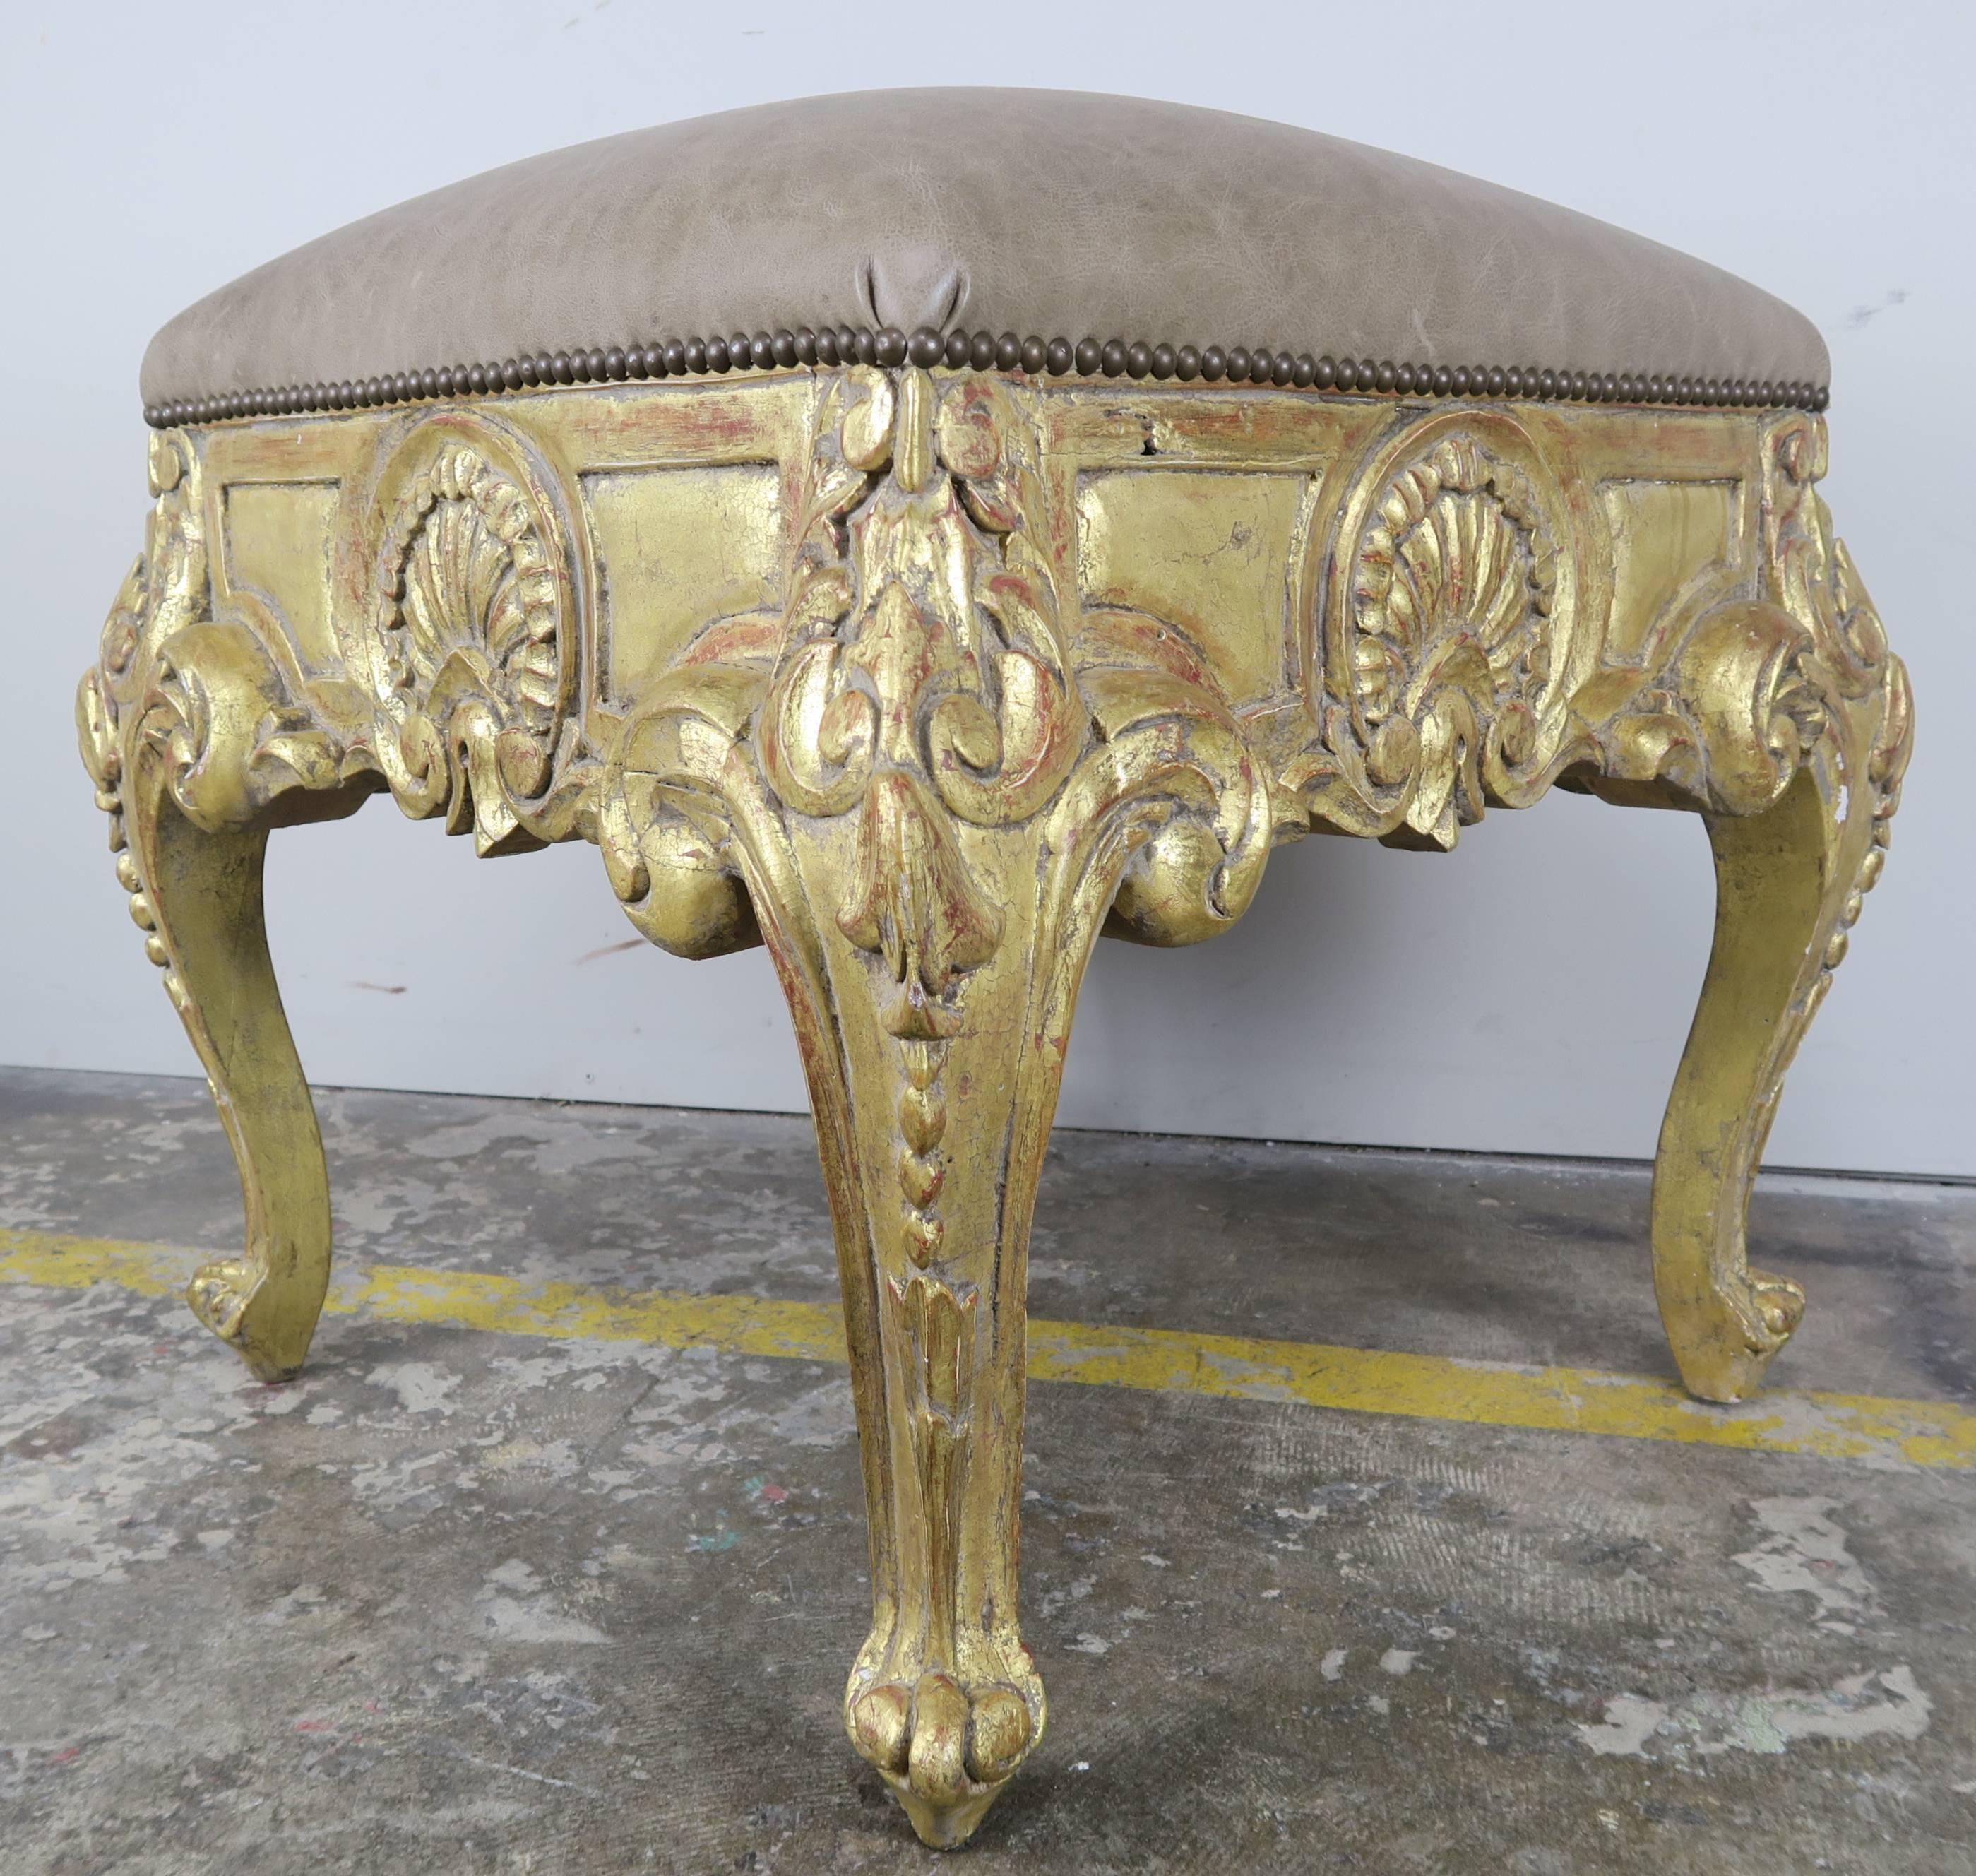 Pair of French Louis XV style giltwood benches standing on four cabriole legs and ram's head feet. Carved shells and acanthus leaves throughout. Upholstered in an elegant taupe leather with nailhead trim detail.